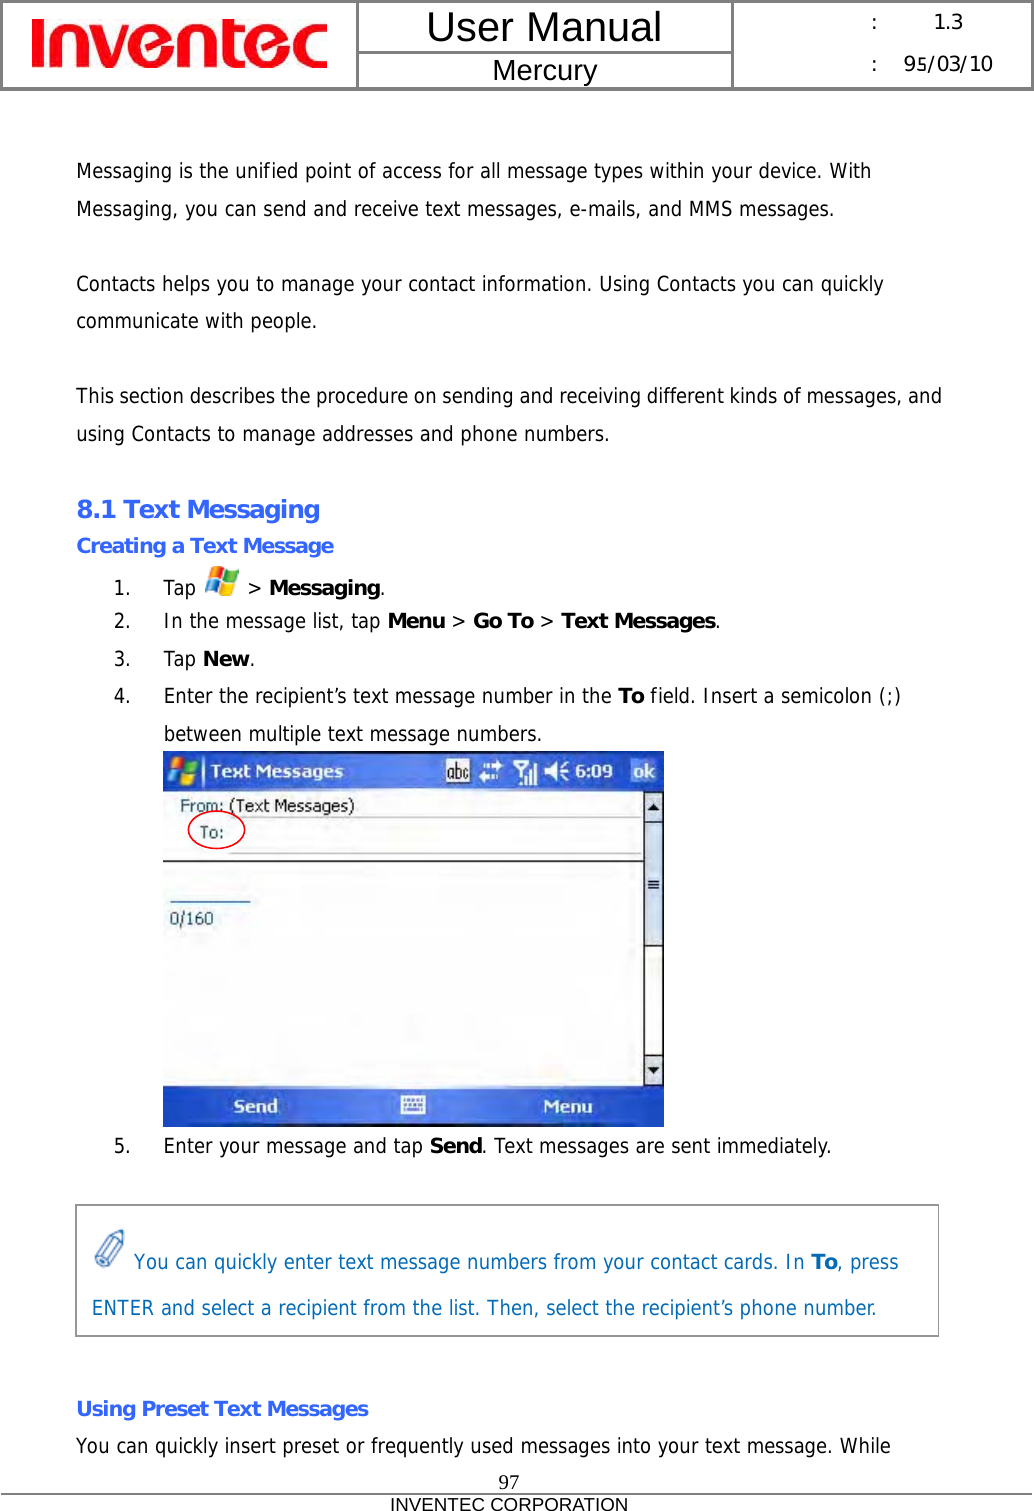 User Manual  Mercury      :  1.3      : 95/03/10  97 INVENTEC CORPORATION    Messaging is the unified point of access for all message types within your device. With Messaging, you can send and receive text messages, e-mails, and MMS messages.  Contacts helps you to manage your contact information. Using Contacts you can quickly communicate with people.  This section describes the procedure on sending and receiving different kinds of messages, and using Contacts to manage addresses and phone numbers.  8.1 Text Messaging Creating a Text Message 1. Tap   &gt; Messaging. 2. In the message list, tap Menu &gt; Go To &gt; Text Messages. 3. Tap New. 4. Enter the recipient’s text message number in the To field. Insert a semicolon (;) between multiple text message numbers.  5. Enter your message and tap Send. Text messages are sent immediately.       Using Preset Text Messages You can quickly insert preset or frequently used messages into your text message. While  You can quickly enter text message numbers from your contact cards. In To, press ENTER and select a recipient from the list. Then, select the recipient’s phone number. 